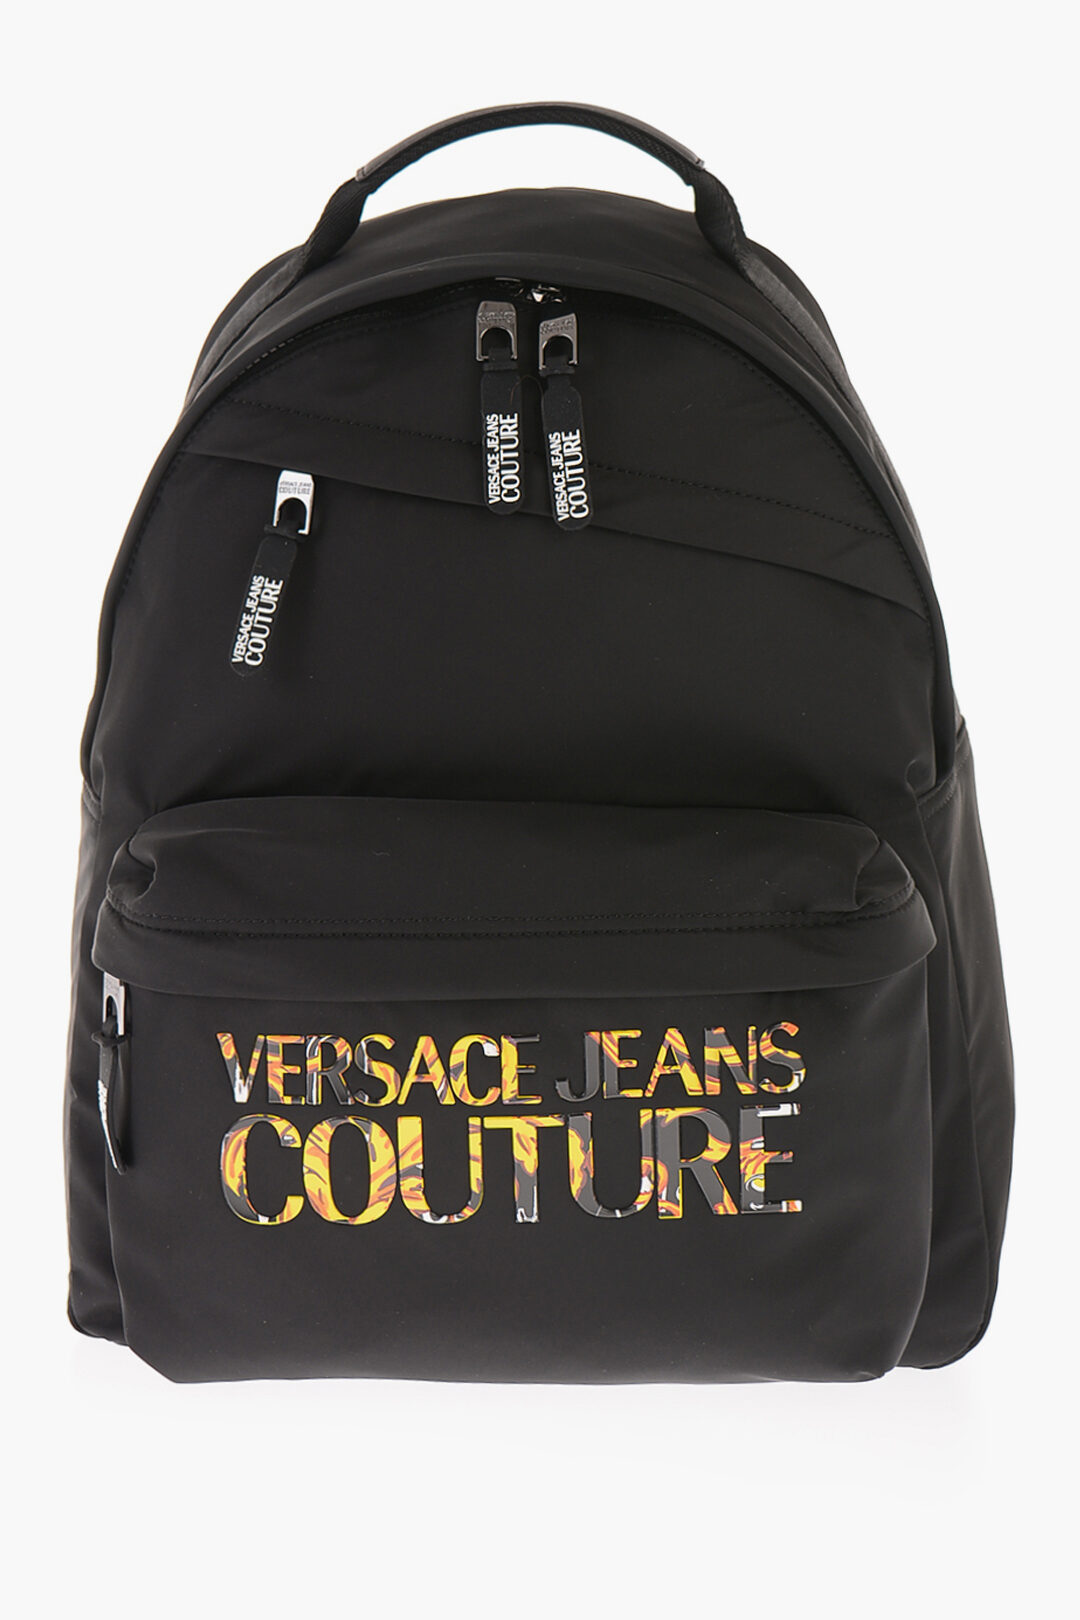 Versace Jeans Couture Logo Backpack for Men